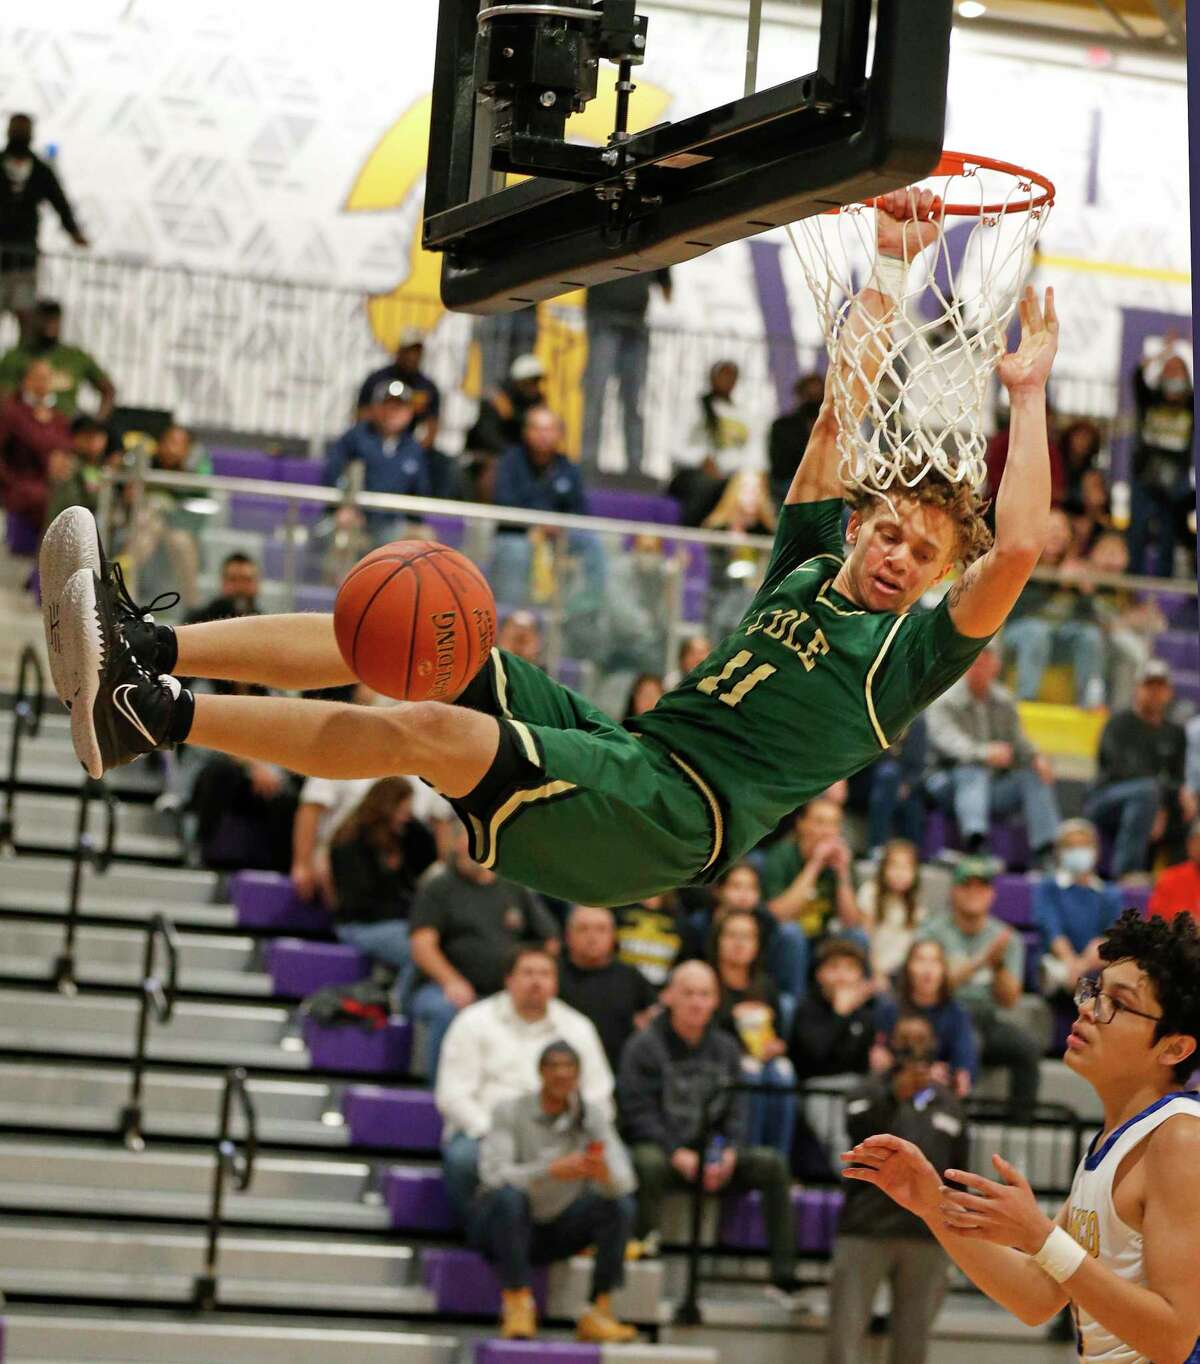 Cole guard Trey Blackmore (11) hangs on the rim after a steal and dunk in Class 3A Third round boys basketball playoff. Cole defeated Blanco 78-41 on Tuesday, March 1, 2022 at Pieper High School gym.